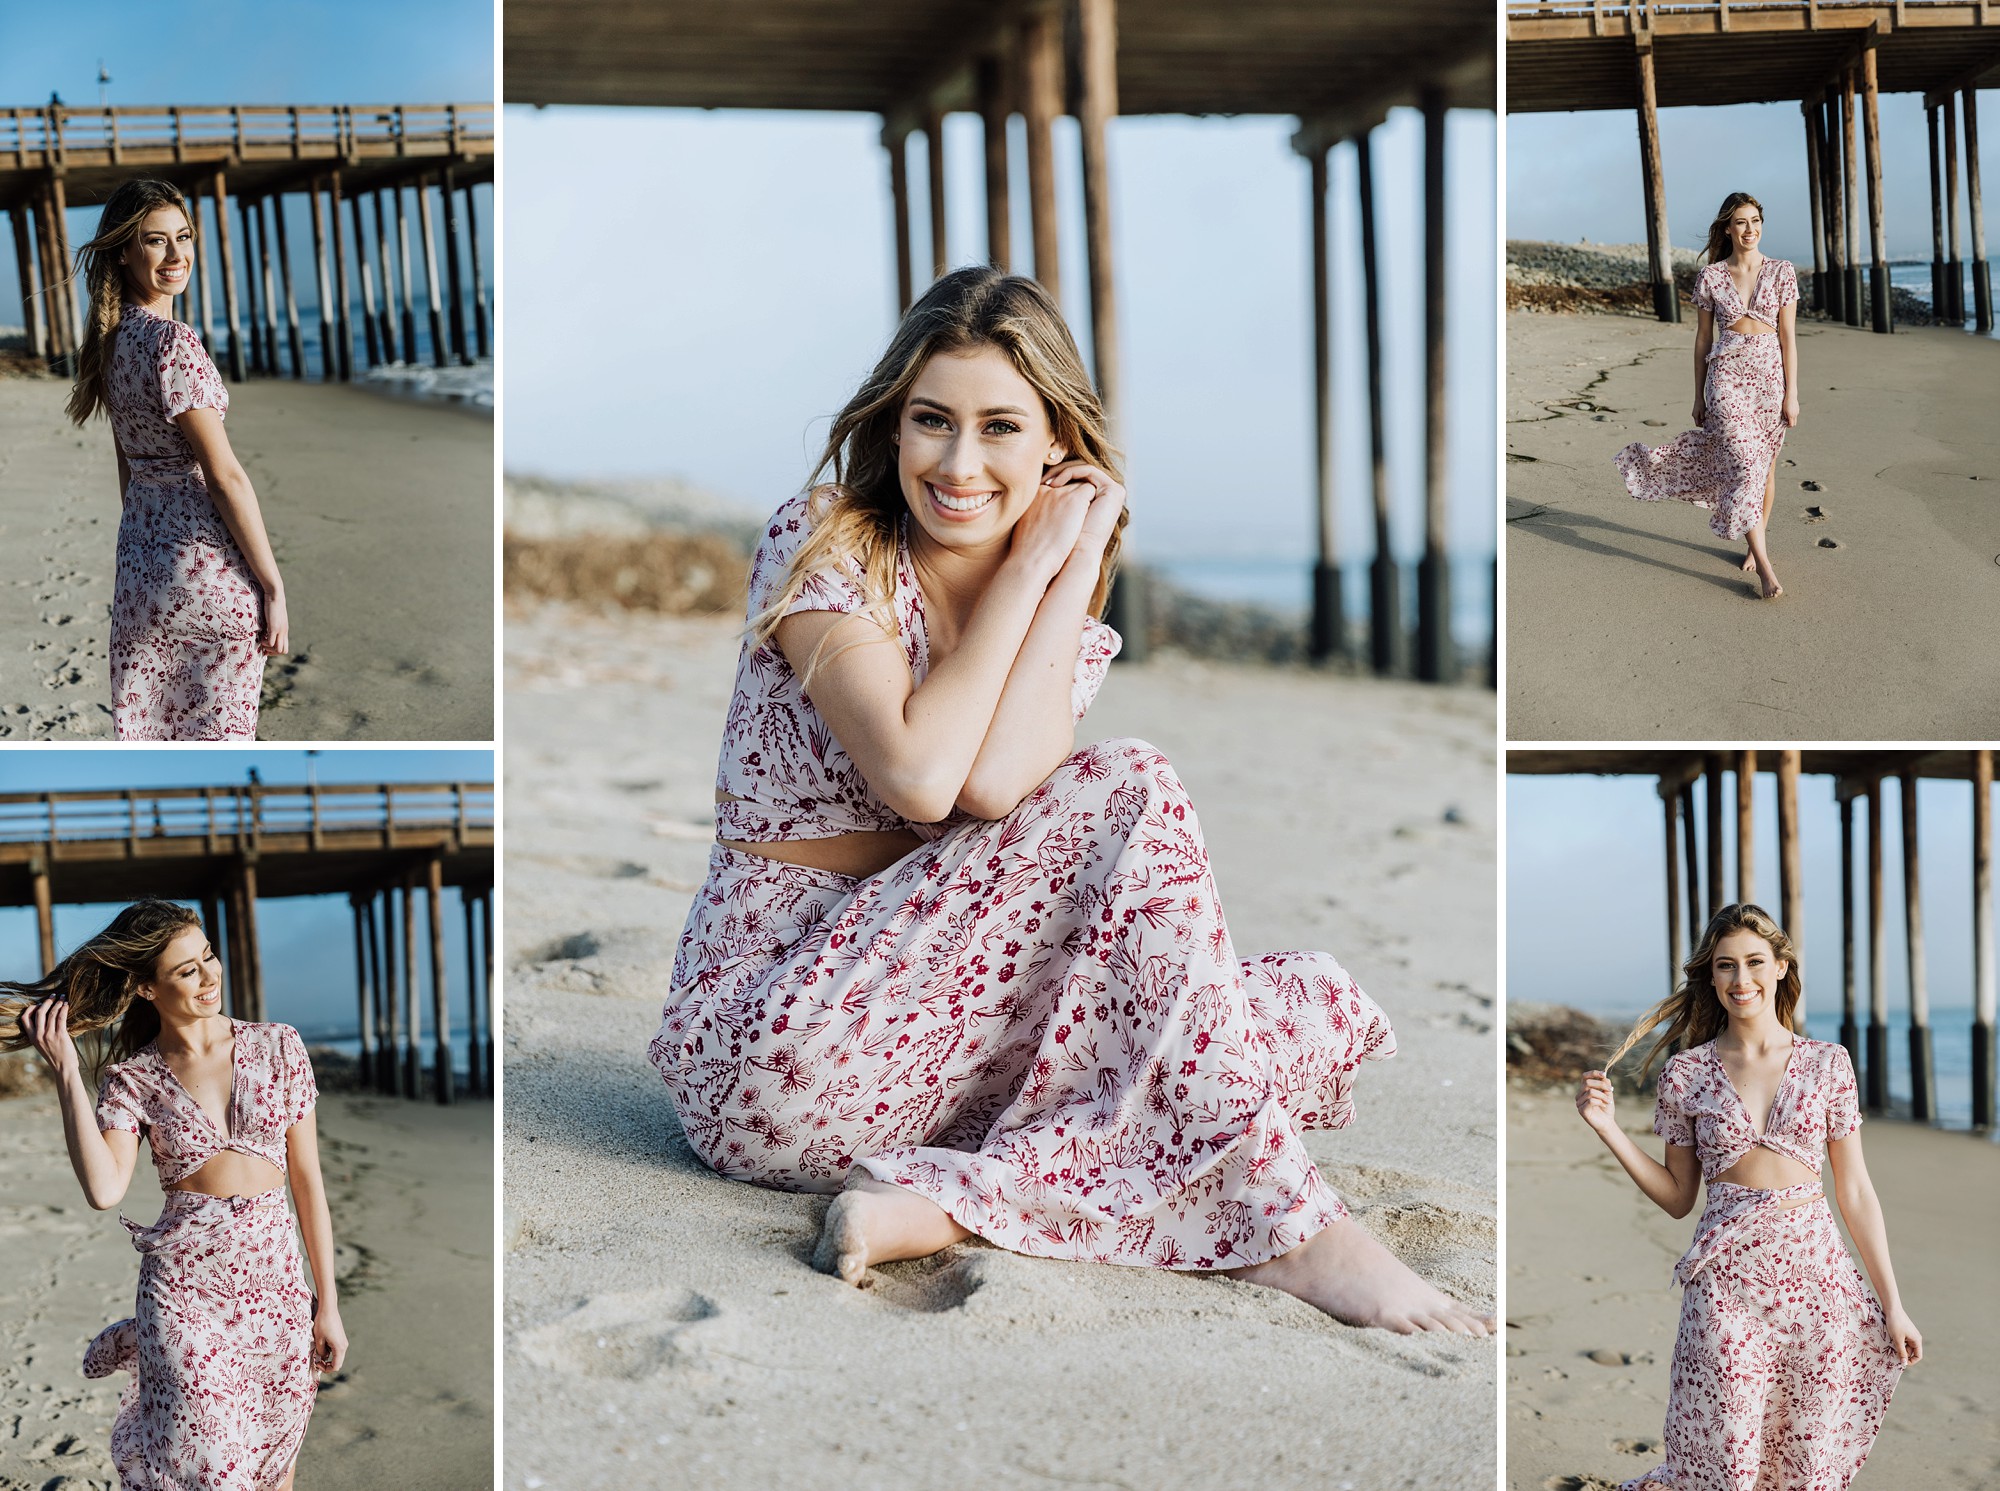 original pictures by photographer tara rochelle, located in southern california, shot in ventura